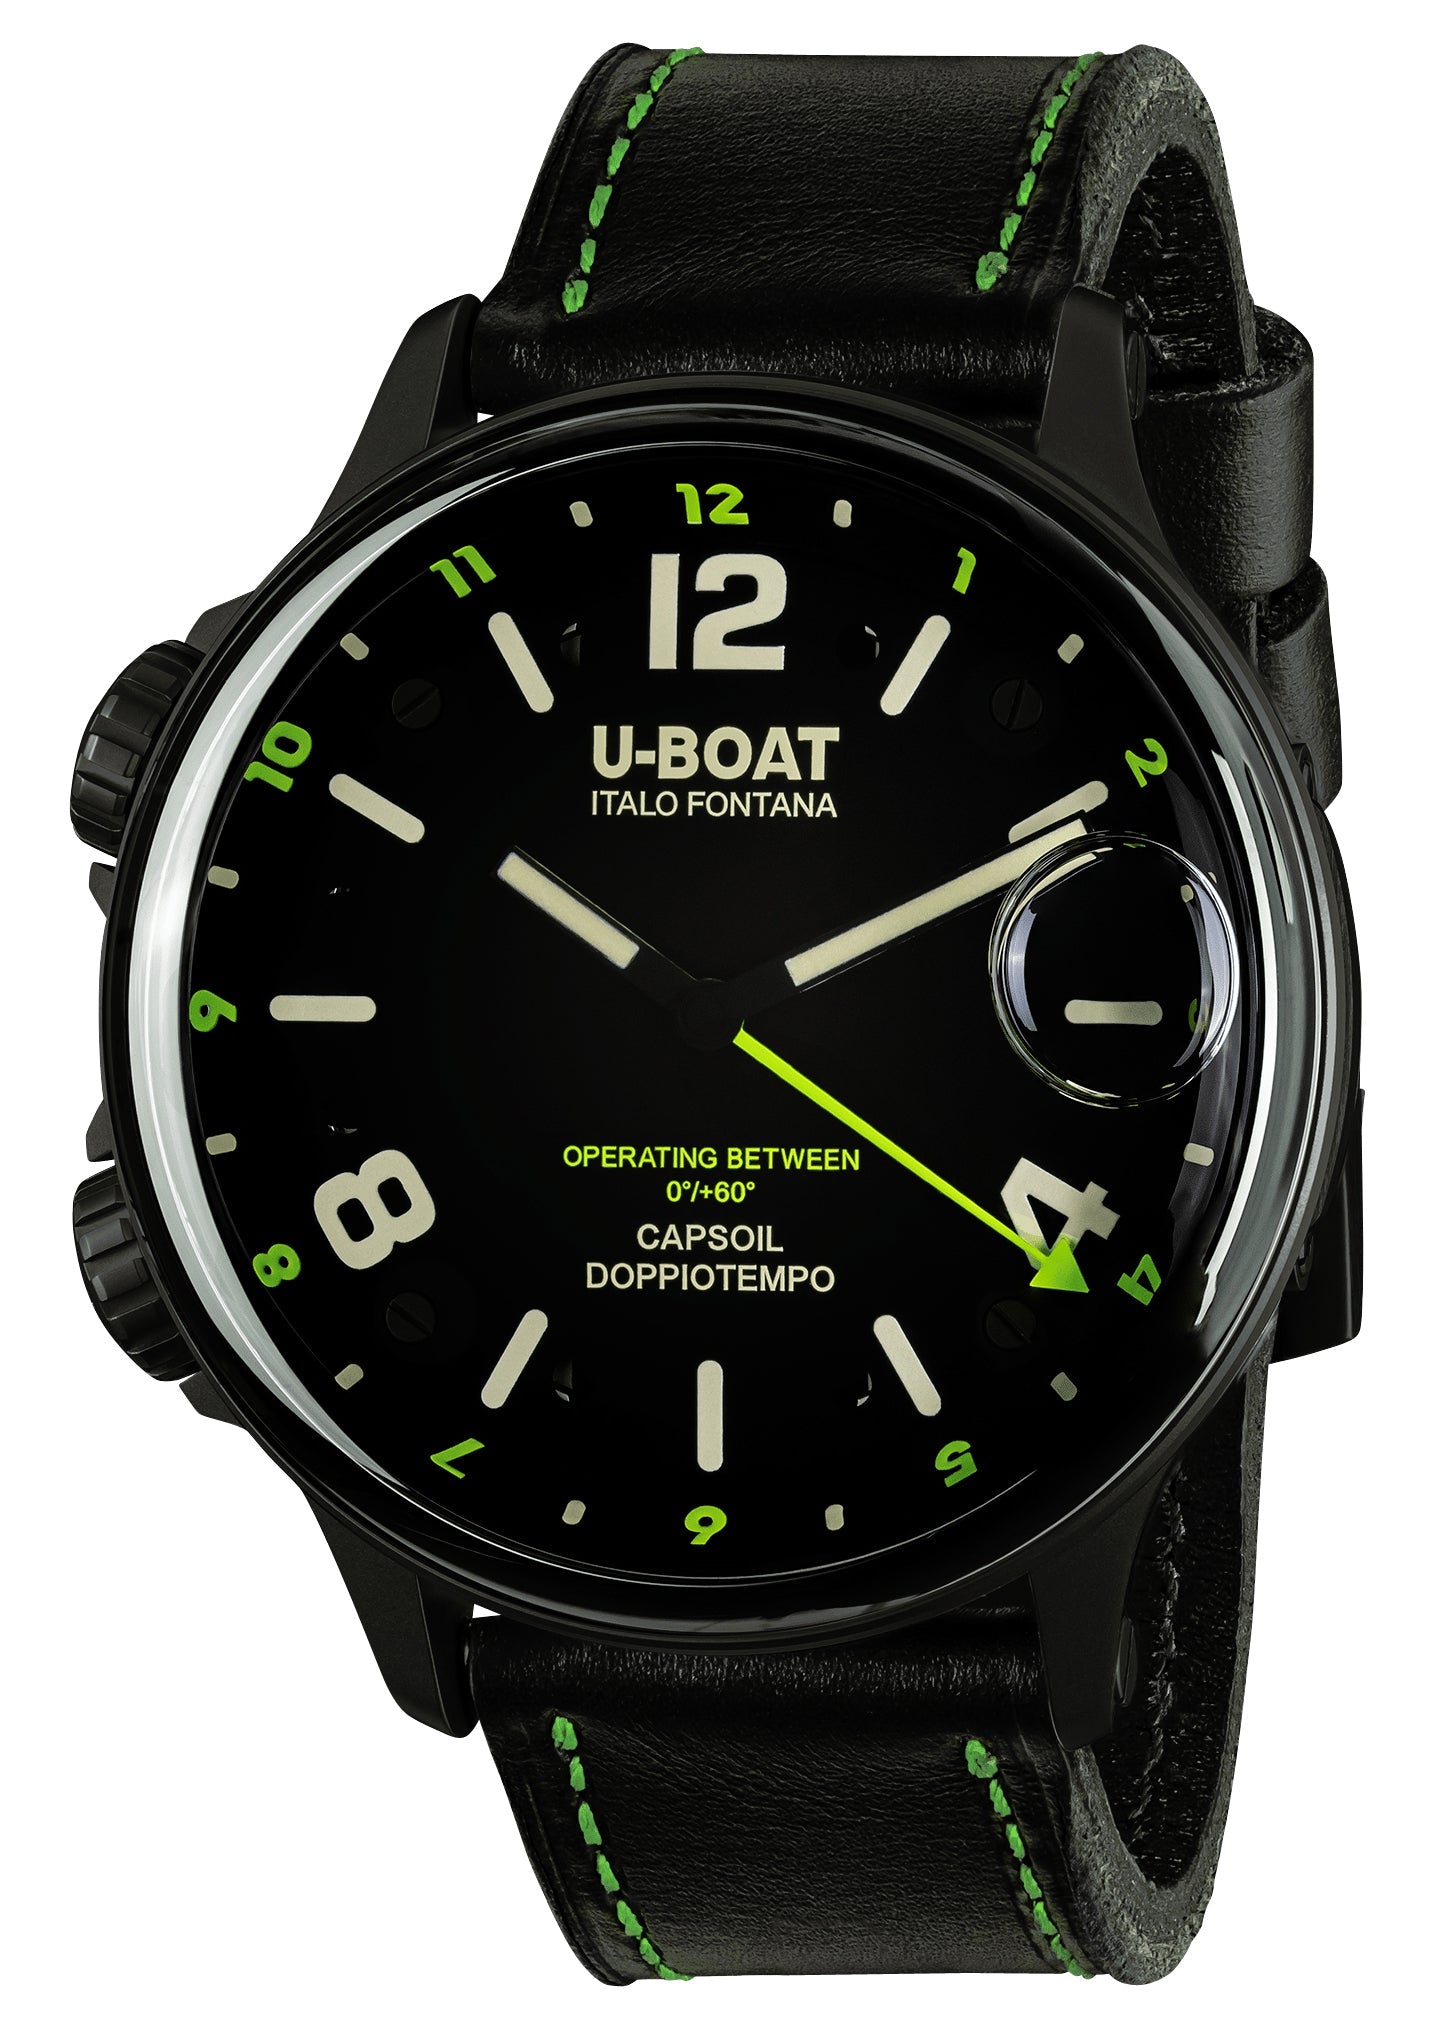 update alt-text with template Watches - Mens-U-Boat-9675-12-hour display, > 50 mm, bi-directional rotating bezel, black, black PVD case, Capsoil Doppiotempo, dual time zone, interchangeable band, leather, mens, menswatches, new arrivals, round, rpSKU_9671, rpSKU_9672, rpSKU_9673, rpSKU_9674, rpSKU_9676, swiss quartz, U-Boat, watches-Watches & Beyond